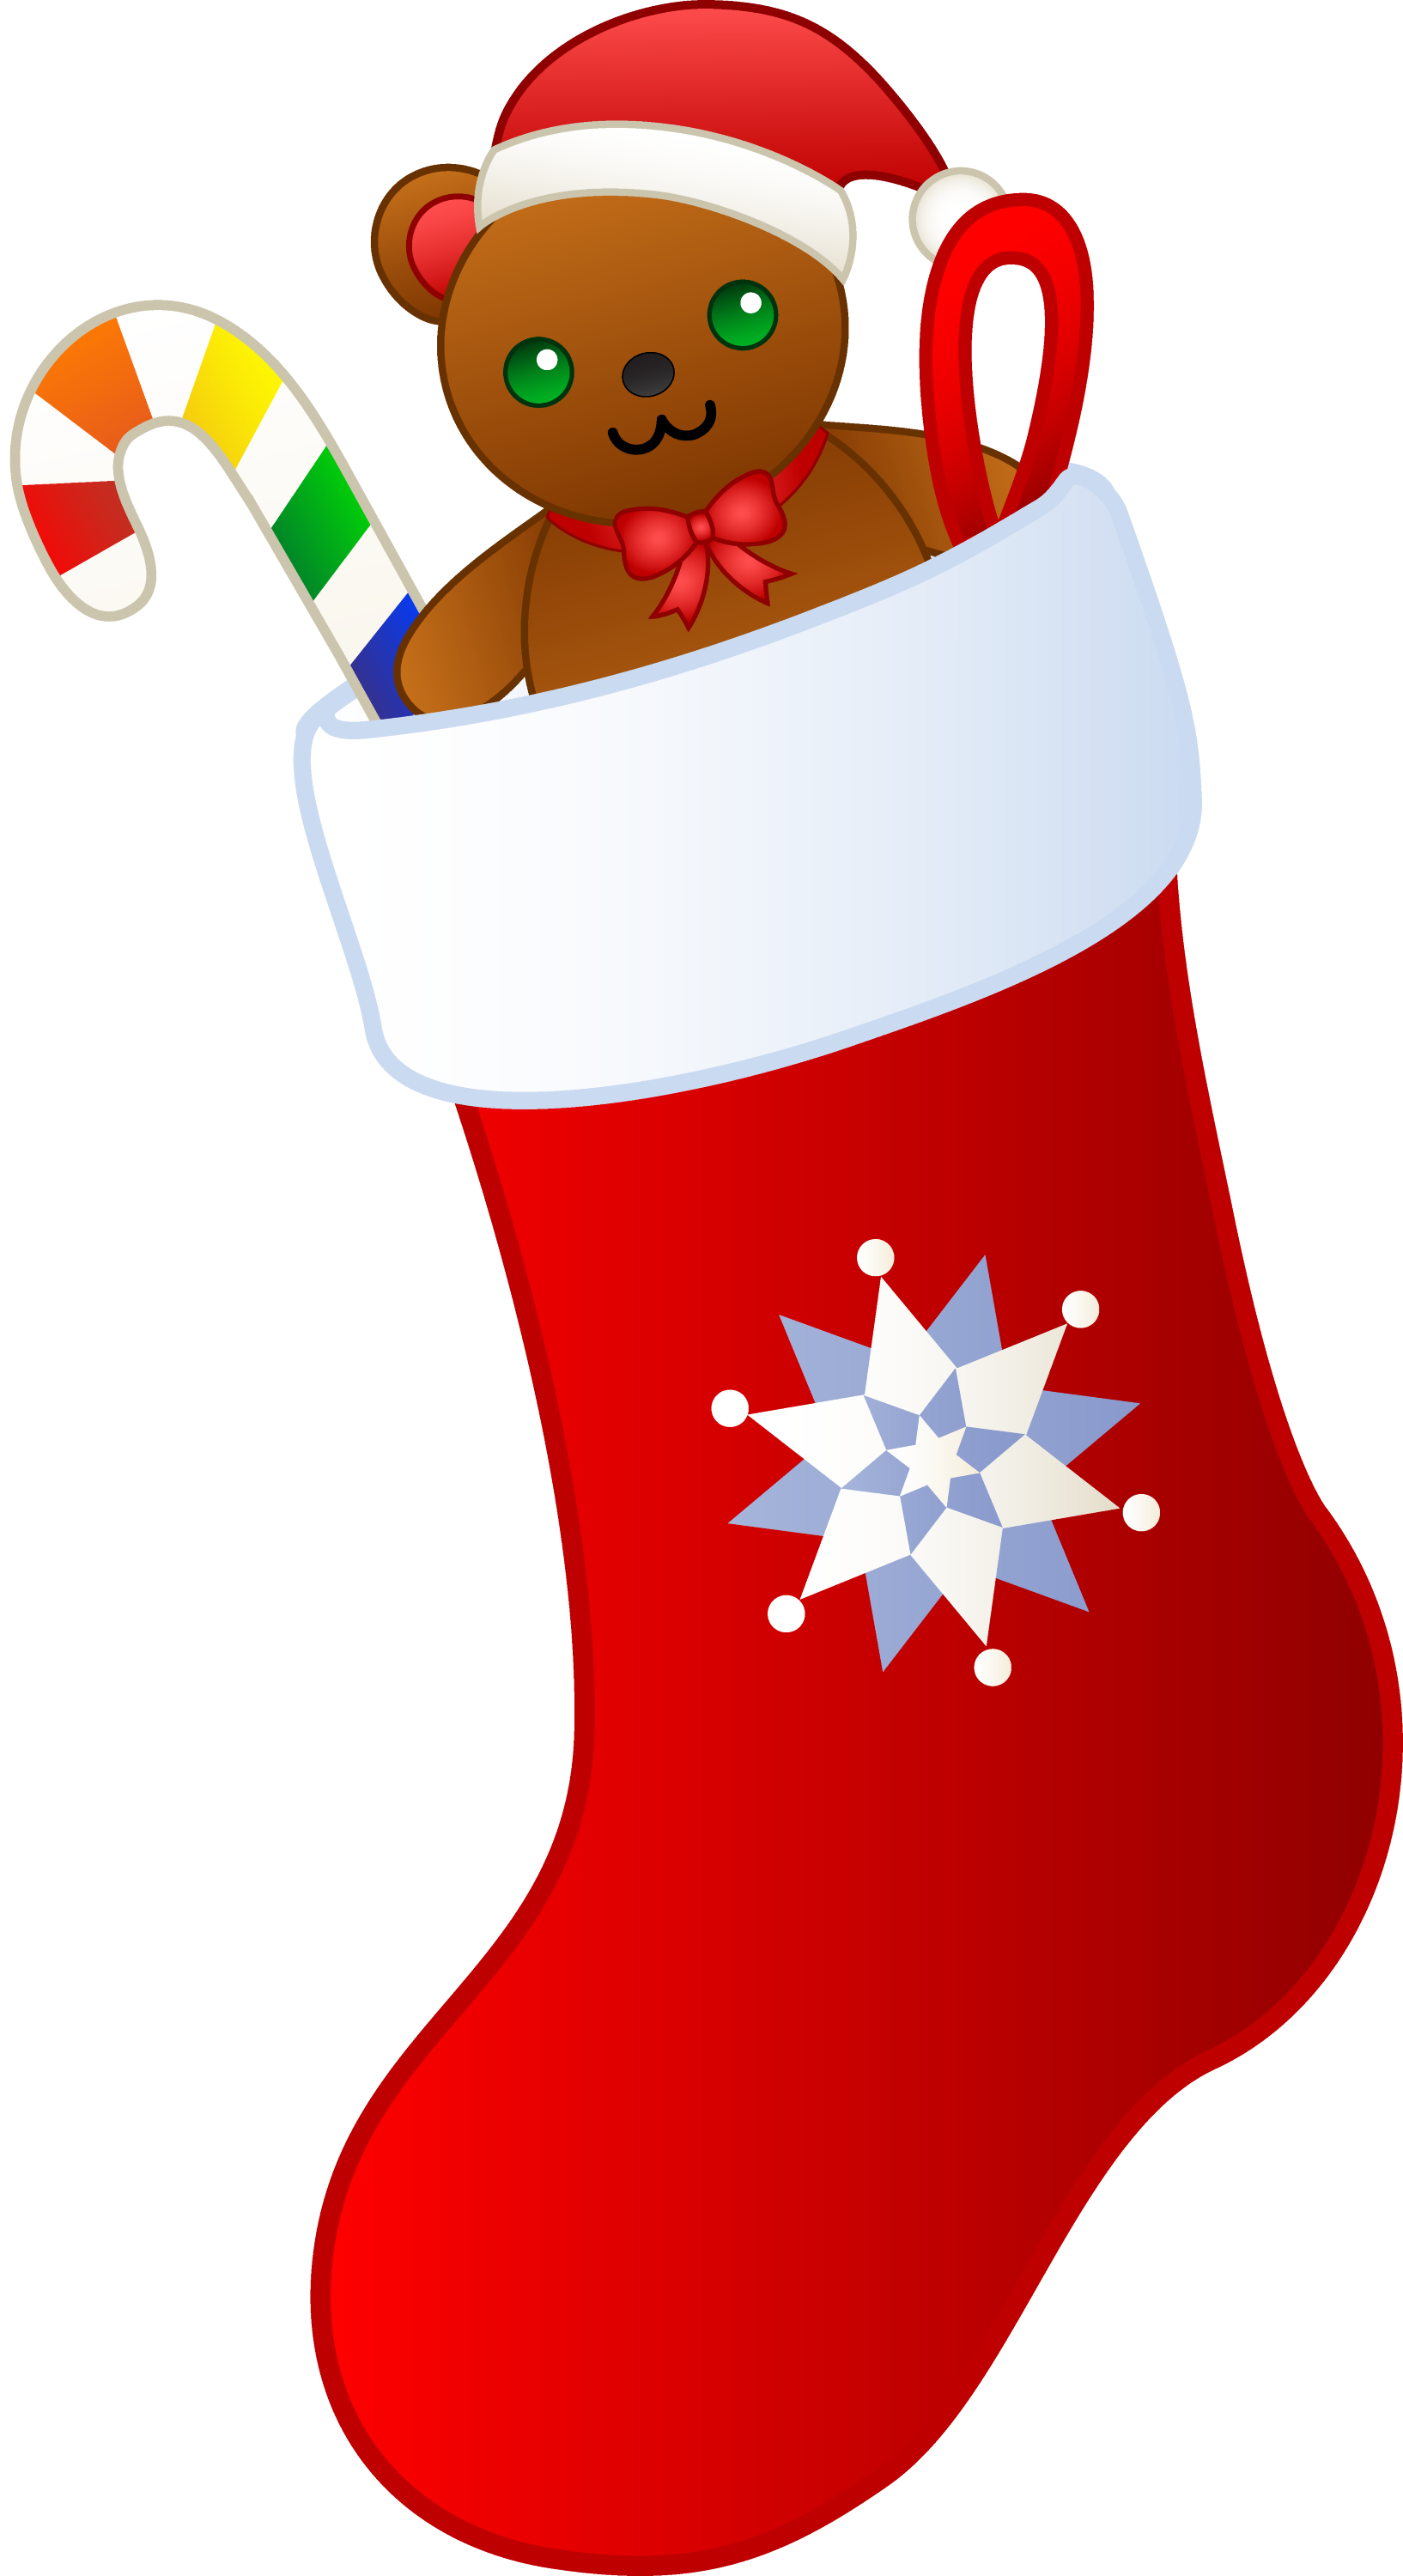 Christmas Stocking Filled With Gifts - Free Clip Art